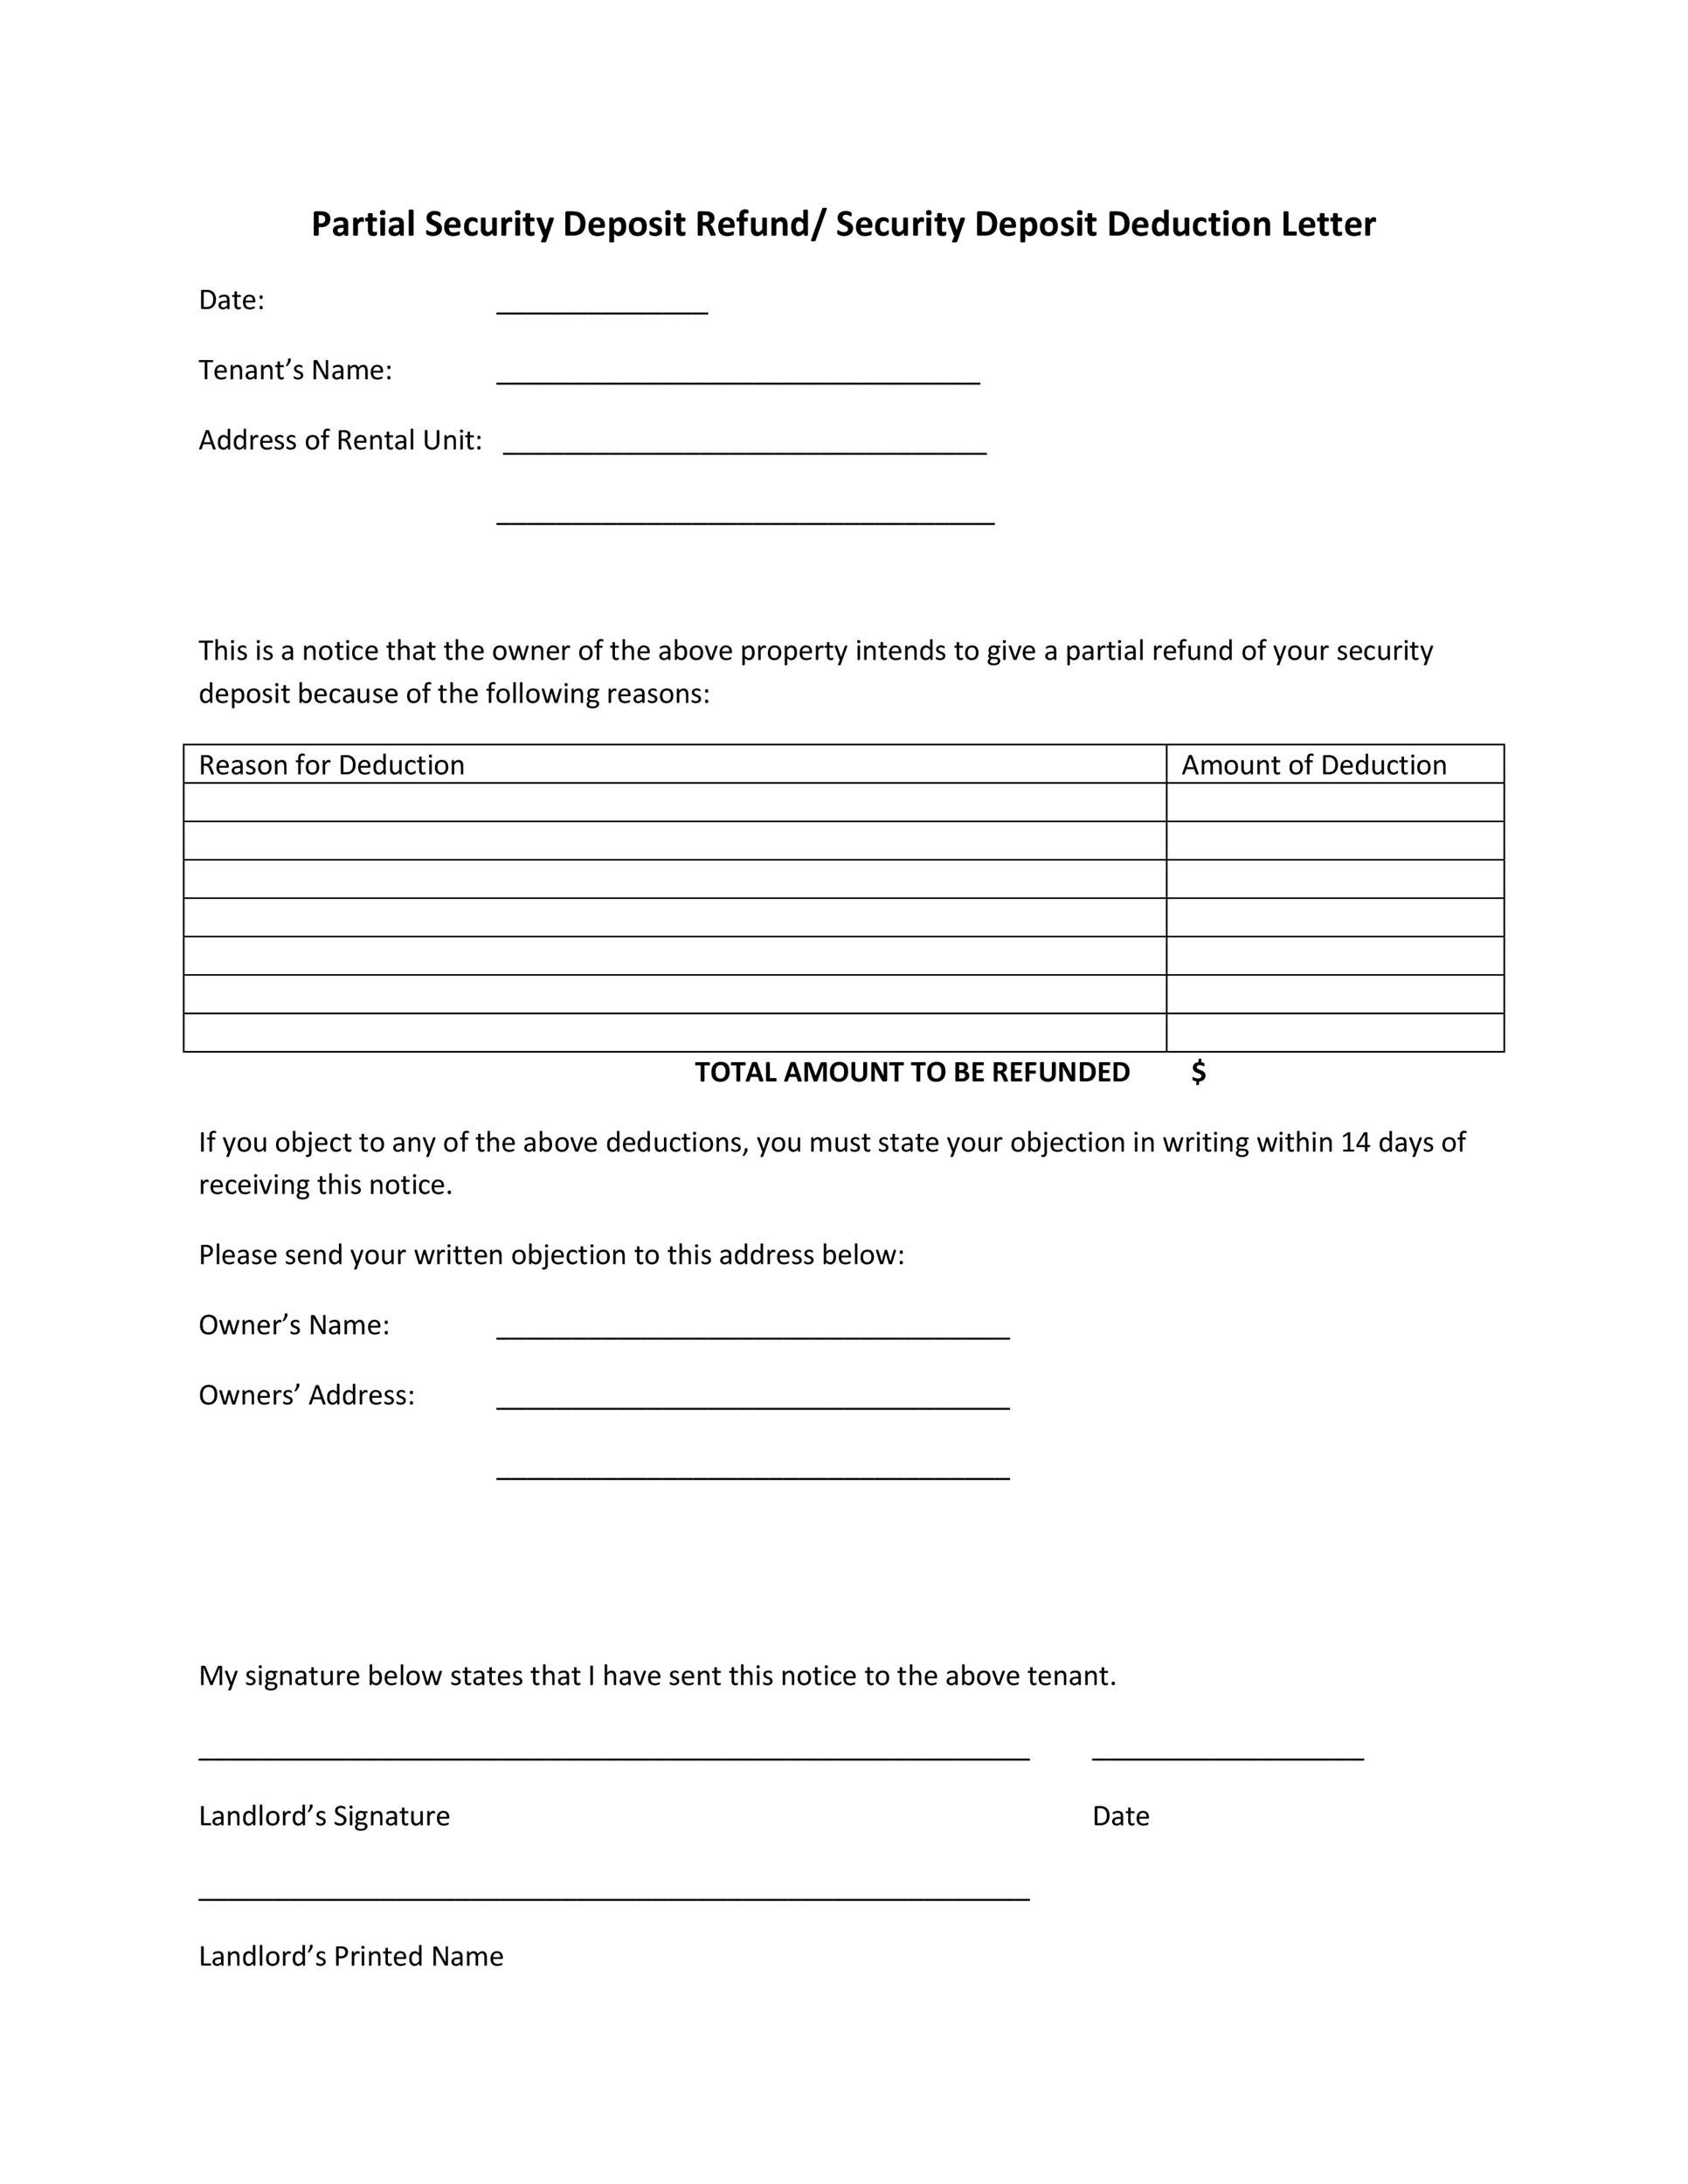 10 Effective Security Deposit Return Letters [MS Word] ᐅ TemplateLab With Regard To Landlord Security Deposit Return Form With Landlord Security Deposit Return Form